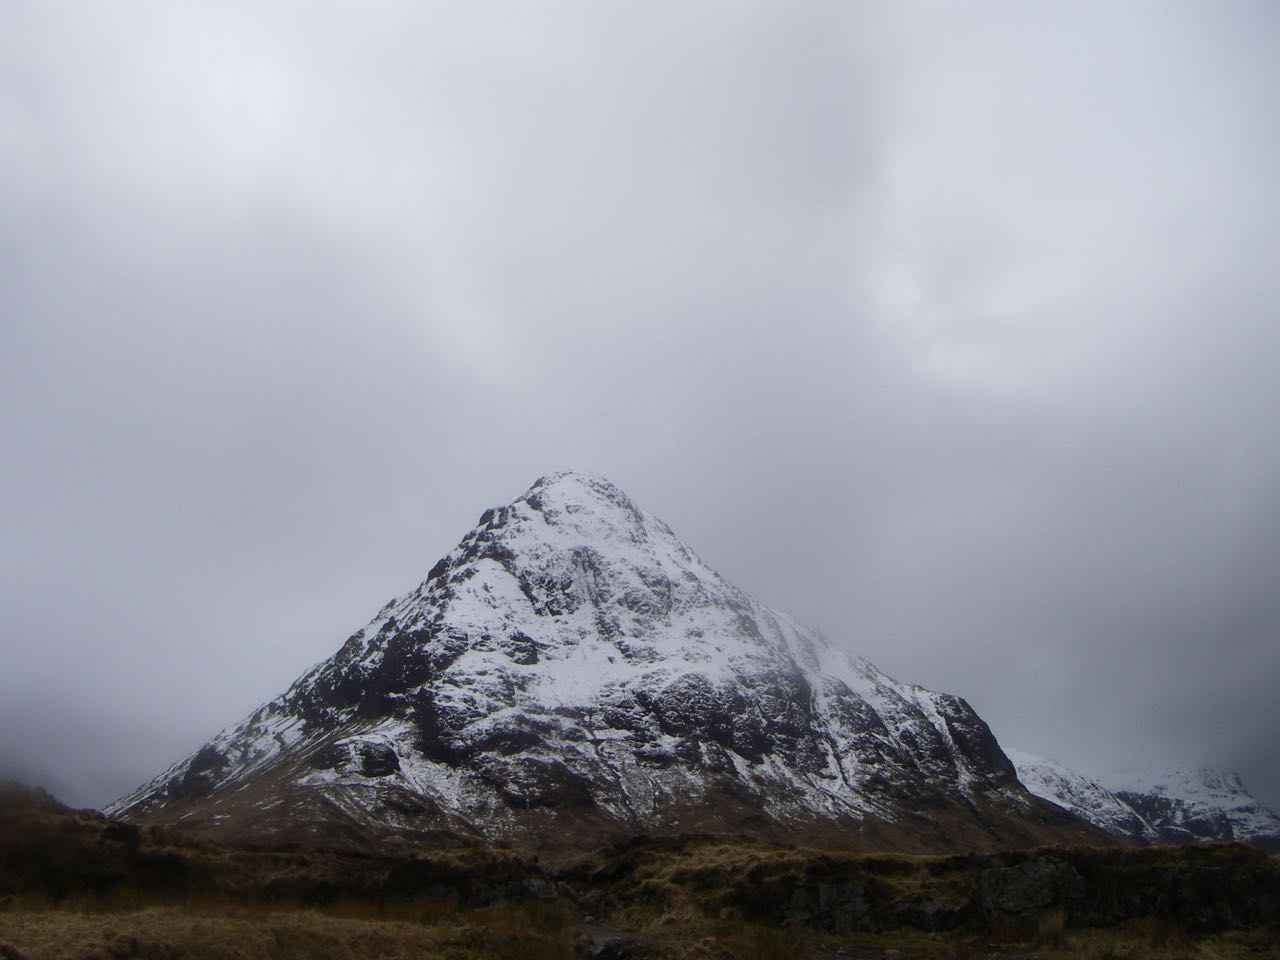 Stob nan Cabar, the 'Wee Buachaille' often overshadowed by its bigger neighbour